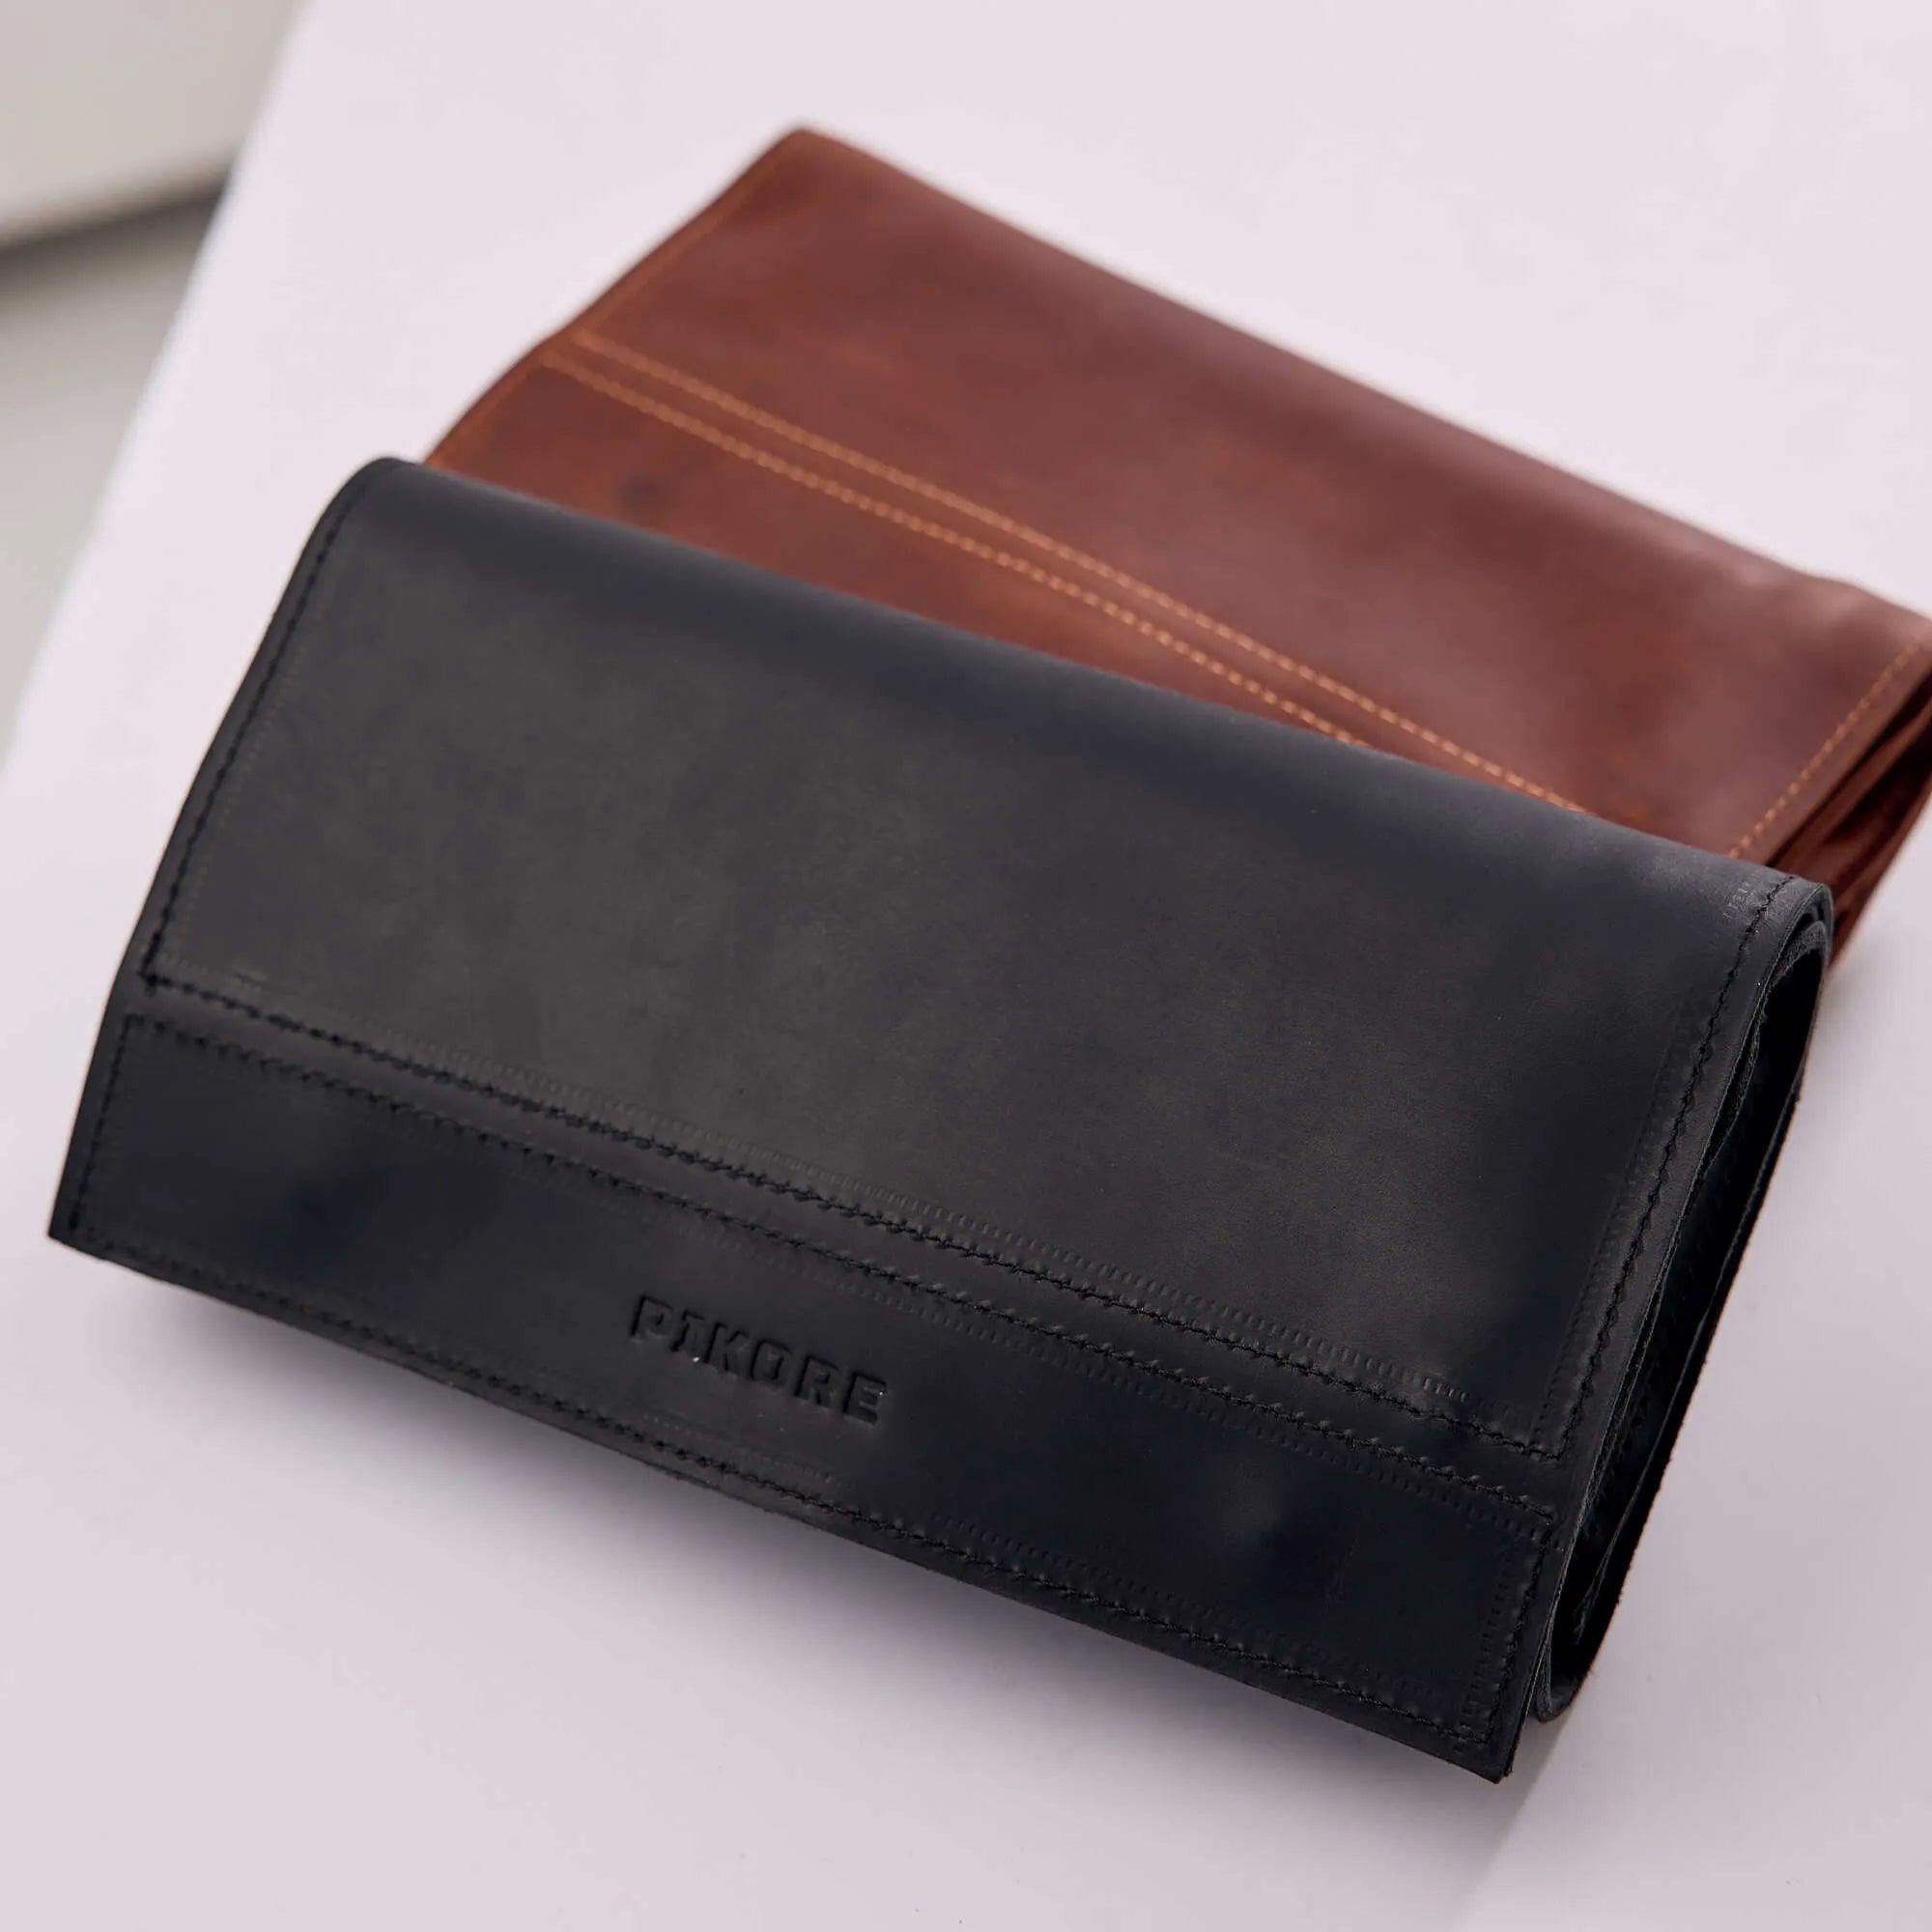 Leather Hanging Toiletry Bag - Pikore